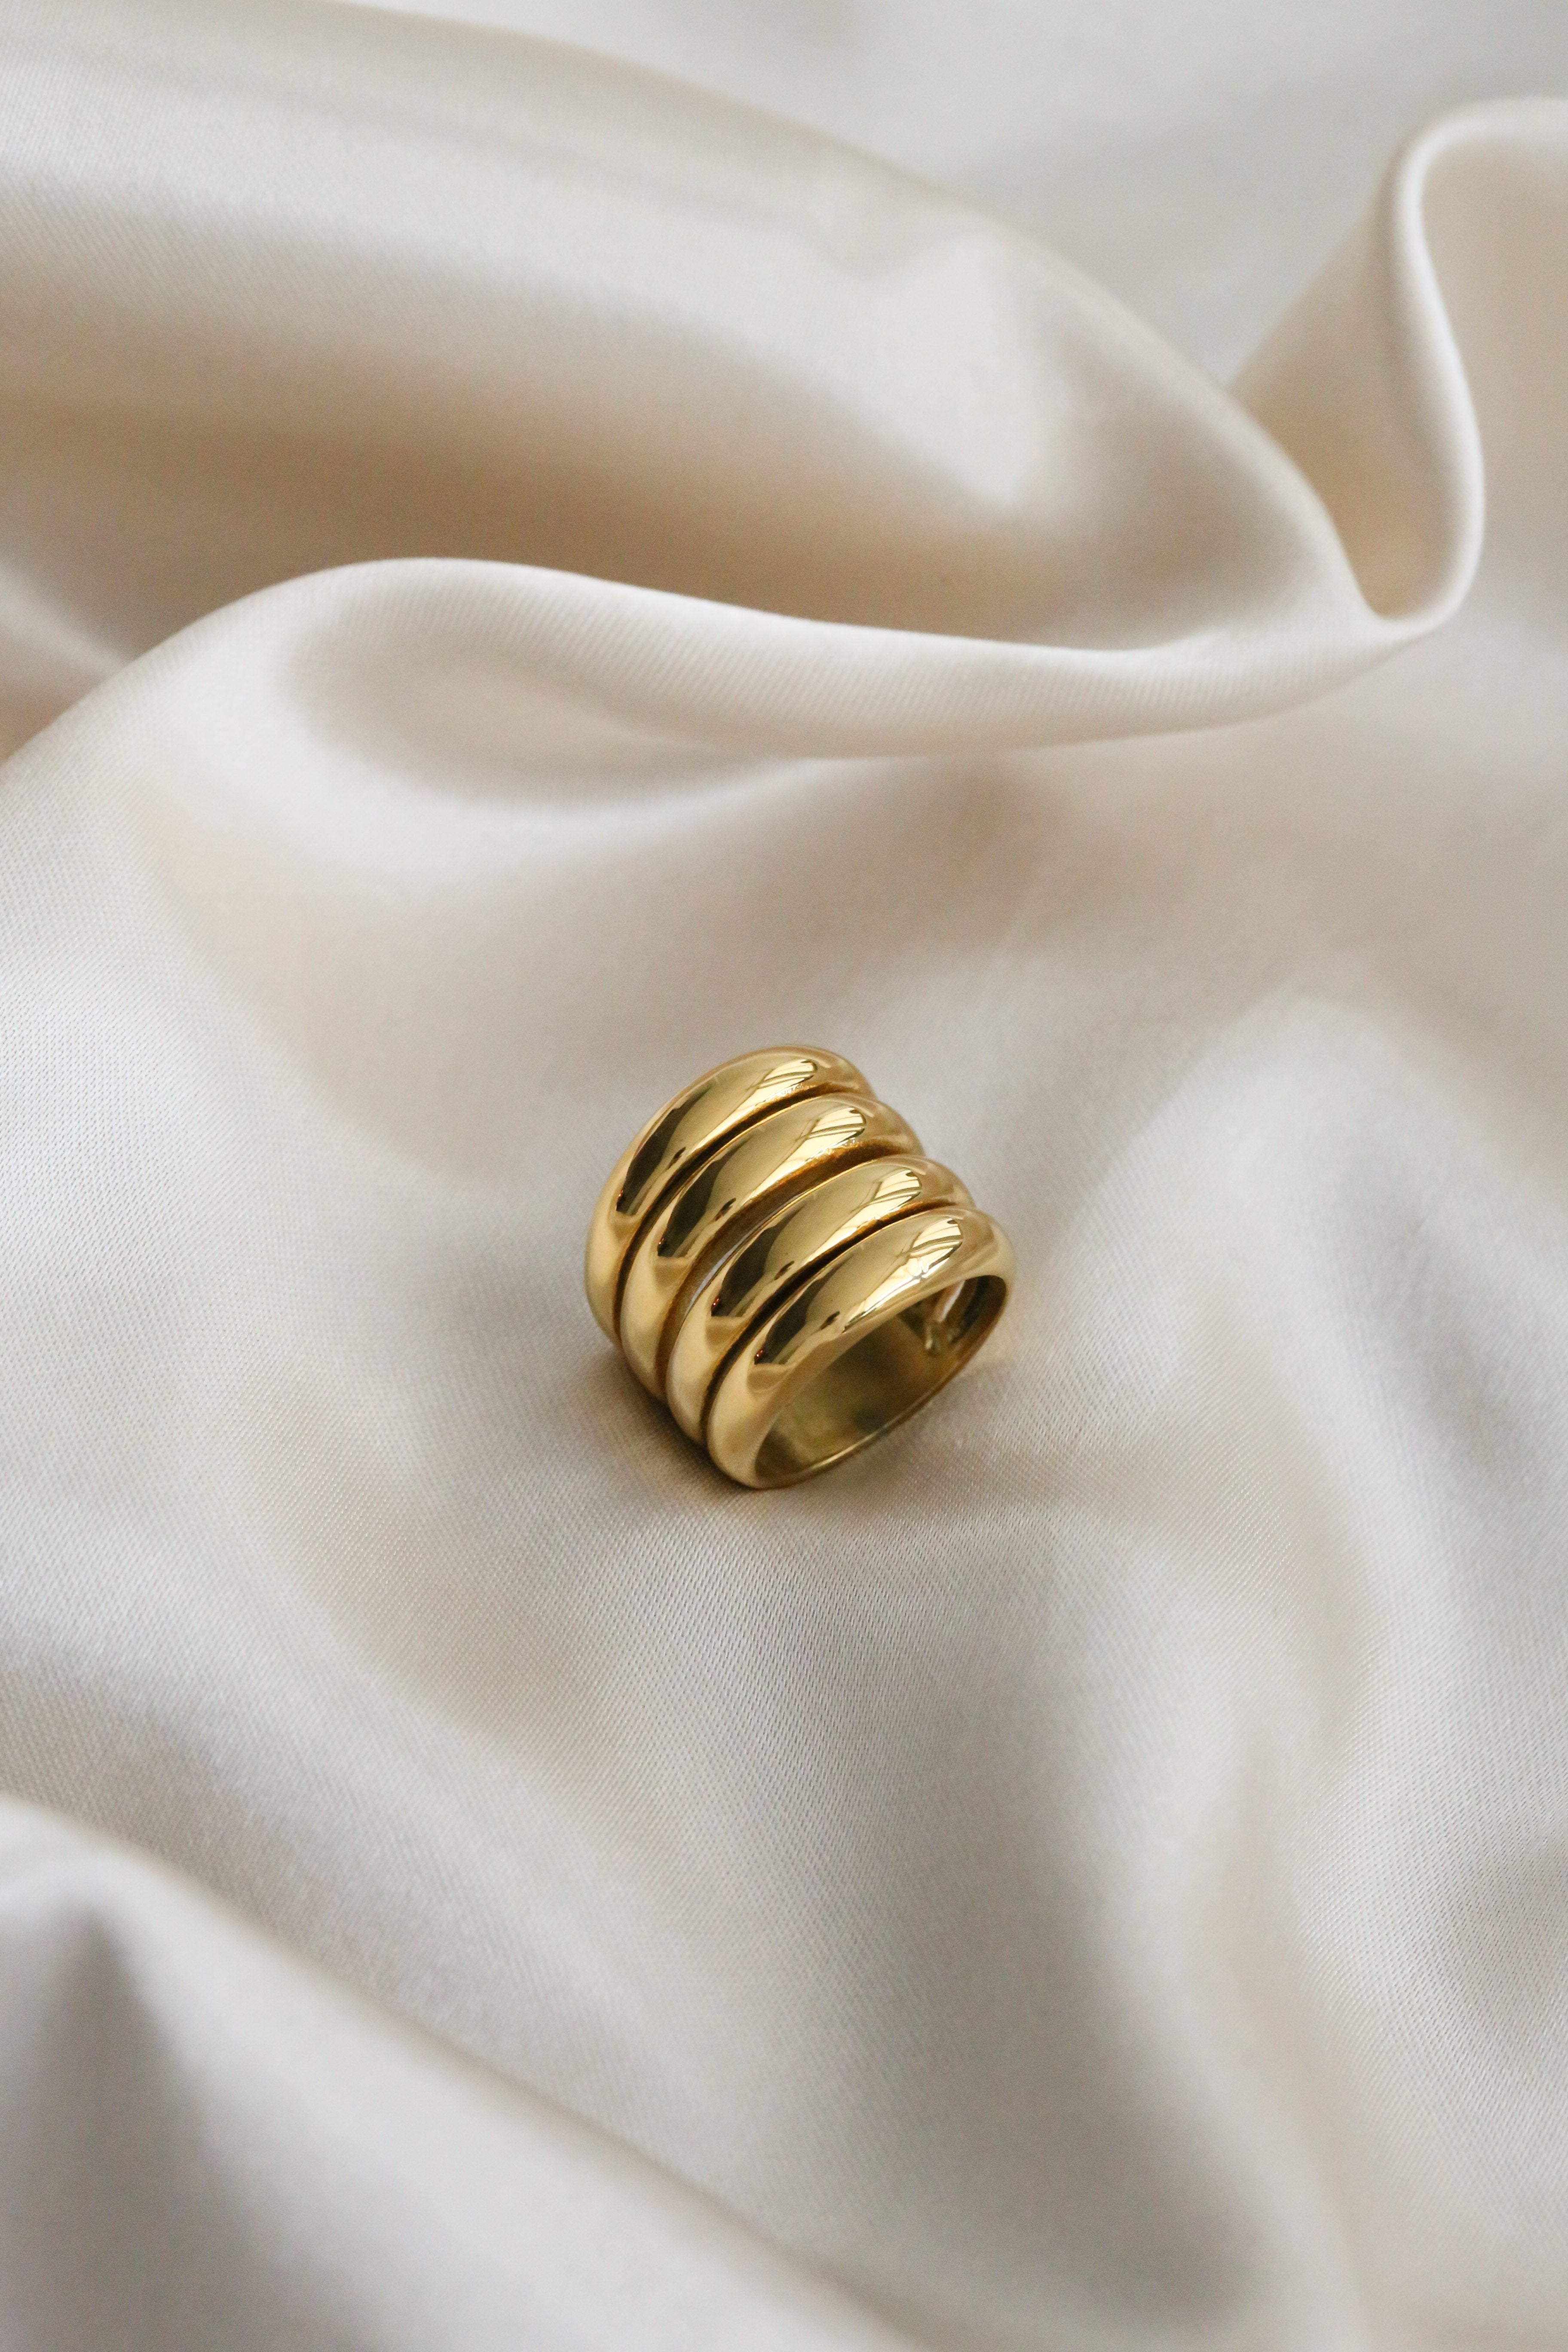 Padova Ring - Boutique Minimaliste has waterproof, durable, elegant and vintage inspired jewelry